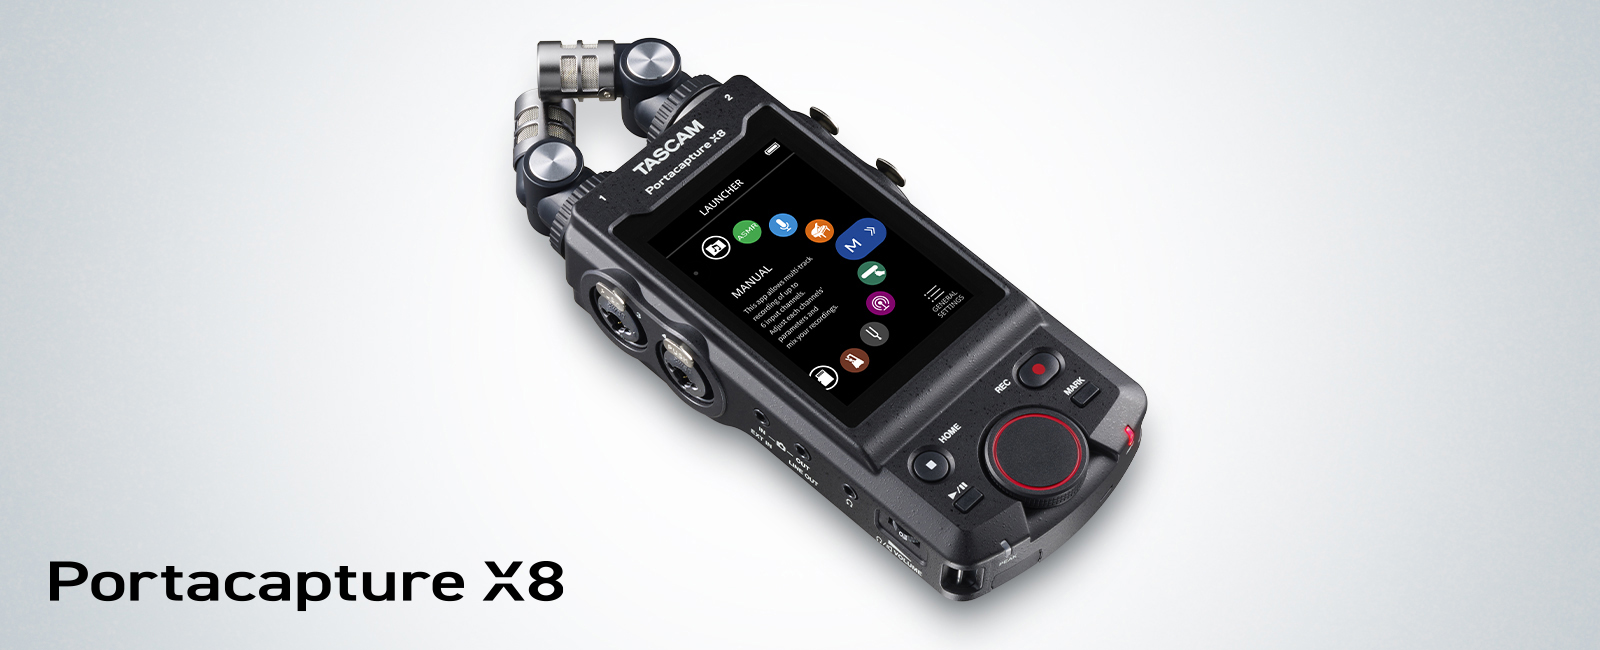 TASCAM Announces the Version 1.30 Firmware Update for the Portacapture X8 Multi-track Handheld Recor